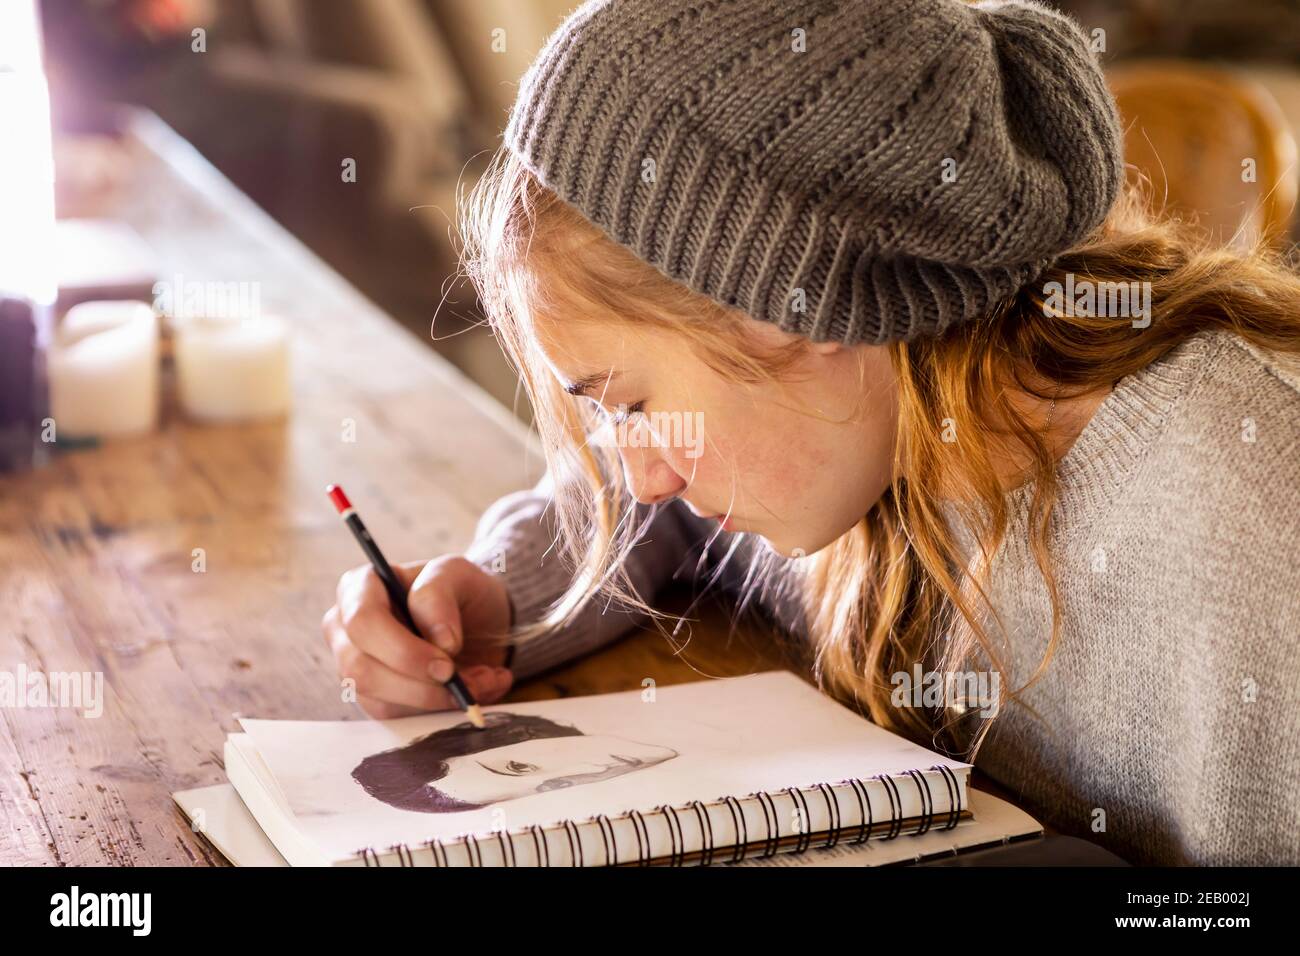 Teenage girl in a woolly hat drawing with a pencil on a sketchpad. Stock Photo